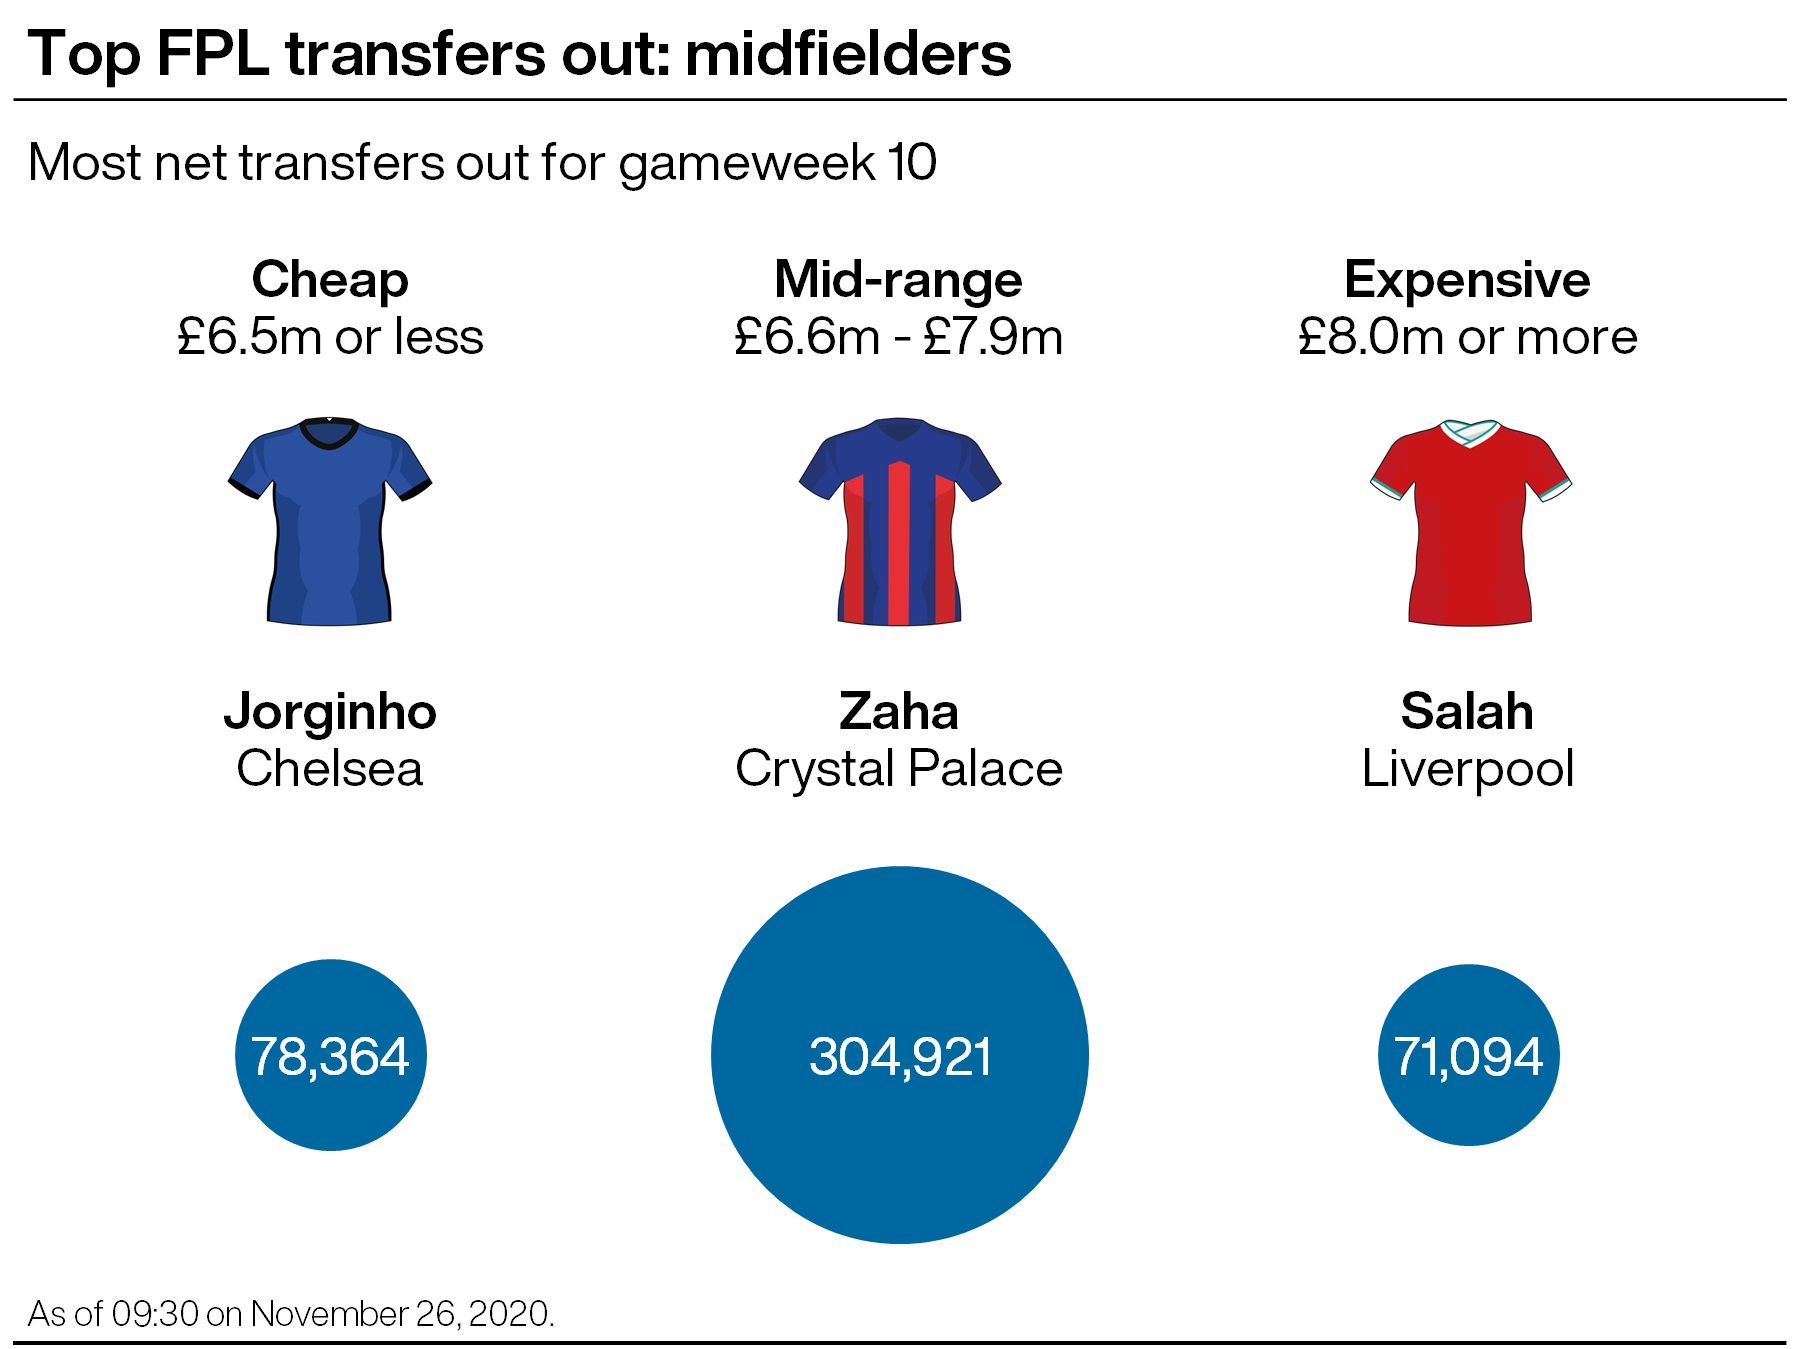 A graphic showing which Premier League midfielders were the most transferred out ahead of gameweek 10 in the FPL